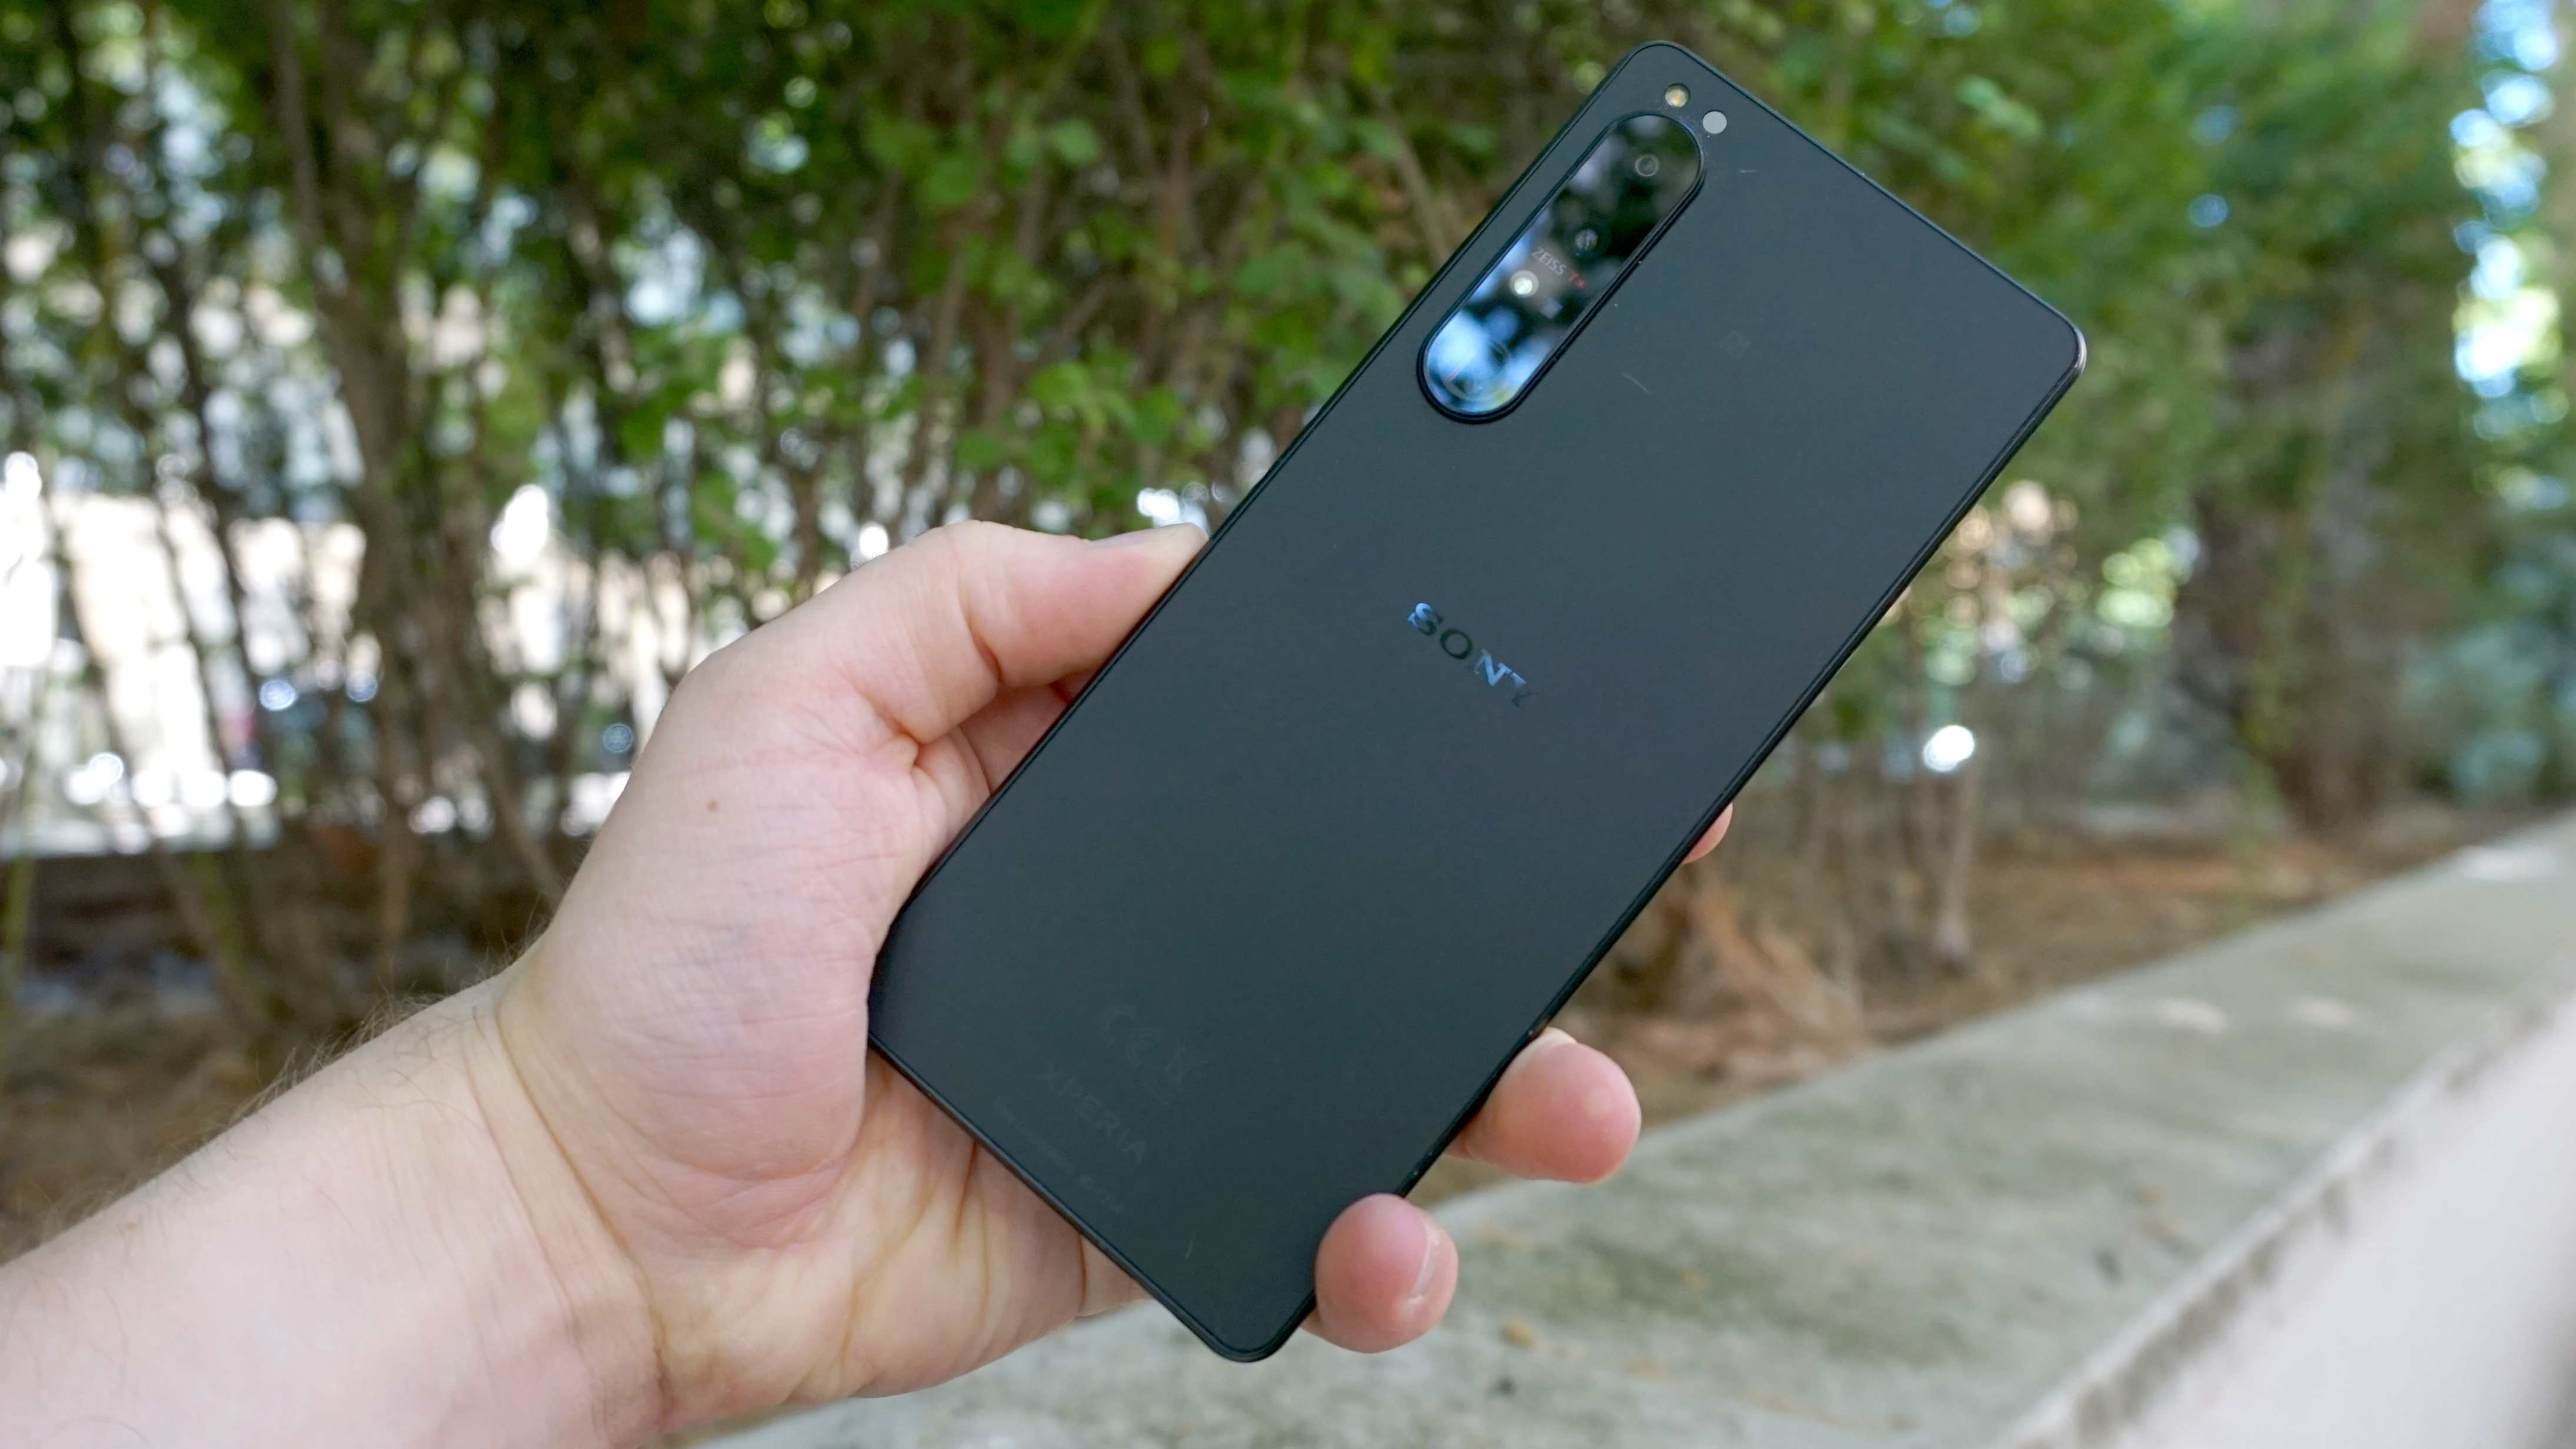 Sony Xperia 1 IV from the back, in someone's hand